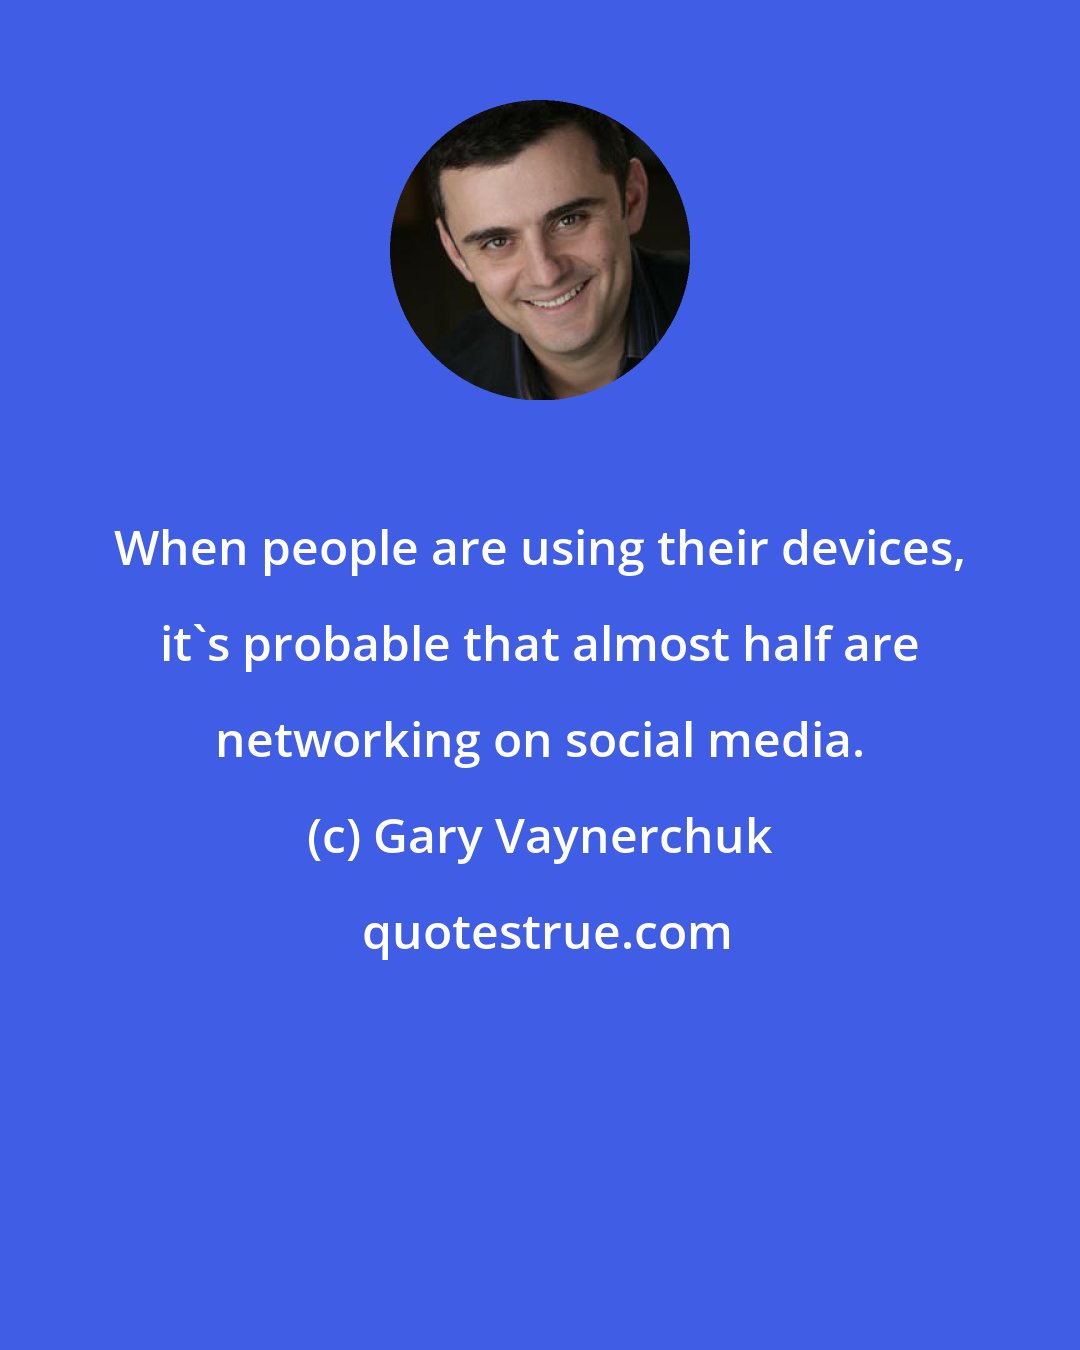 Gary Vaynerchuk: When people are using their devices, it's probable that almost half are networking on social media.